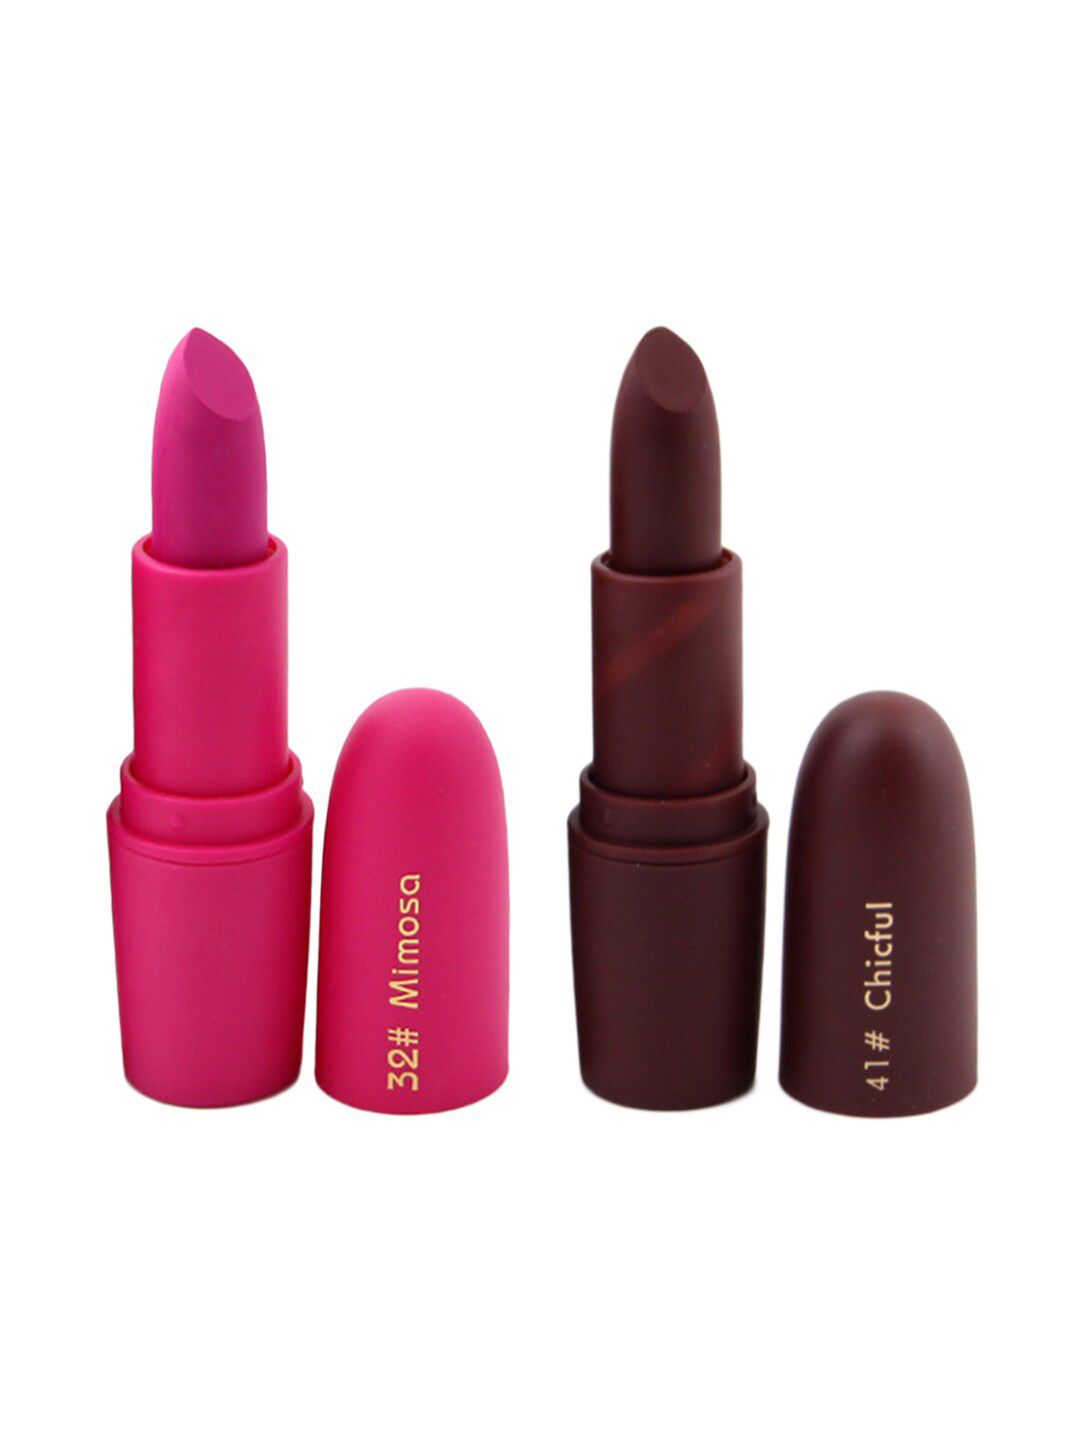 MISS ROSE Professional Make-Up Set of 2 Matte Creamy Lipsticks - Mimosa 32 & Chicful 41 Price in India